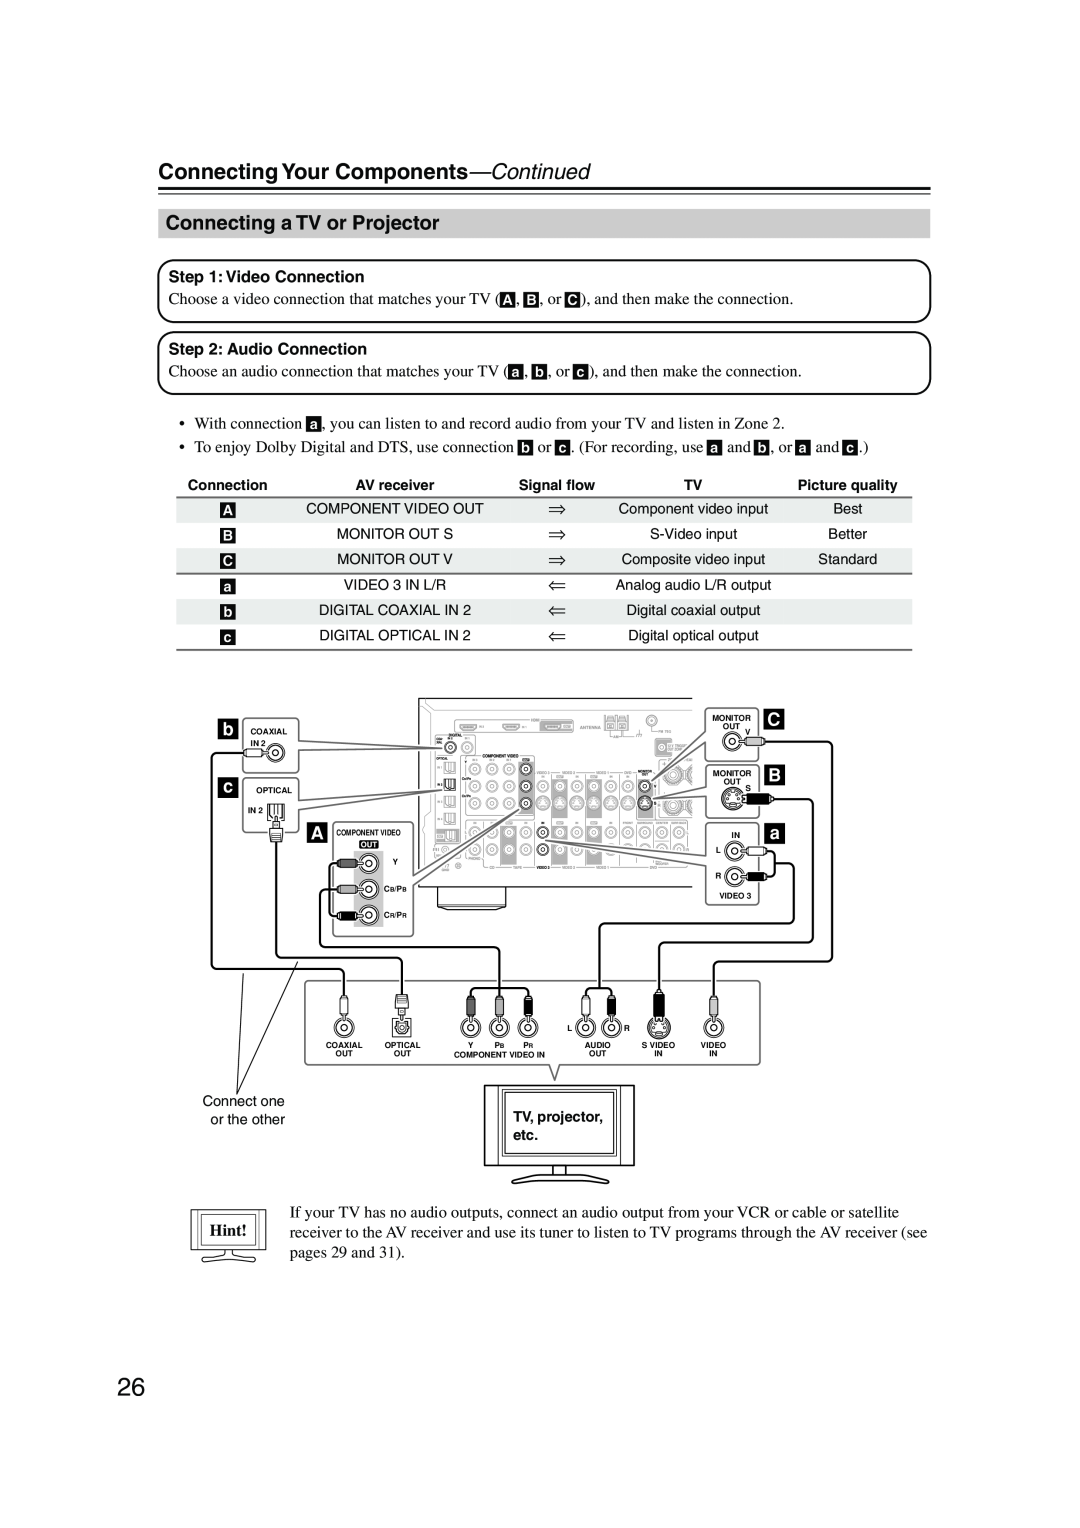 Onkyo SR804 instruction manual Connecting a TV or Projector, C B a, Connecting Your Components—Continued, Hint 